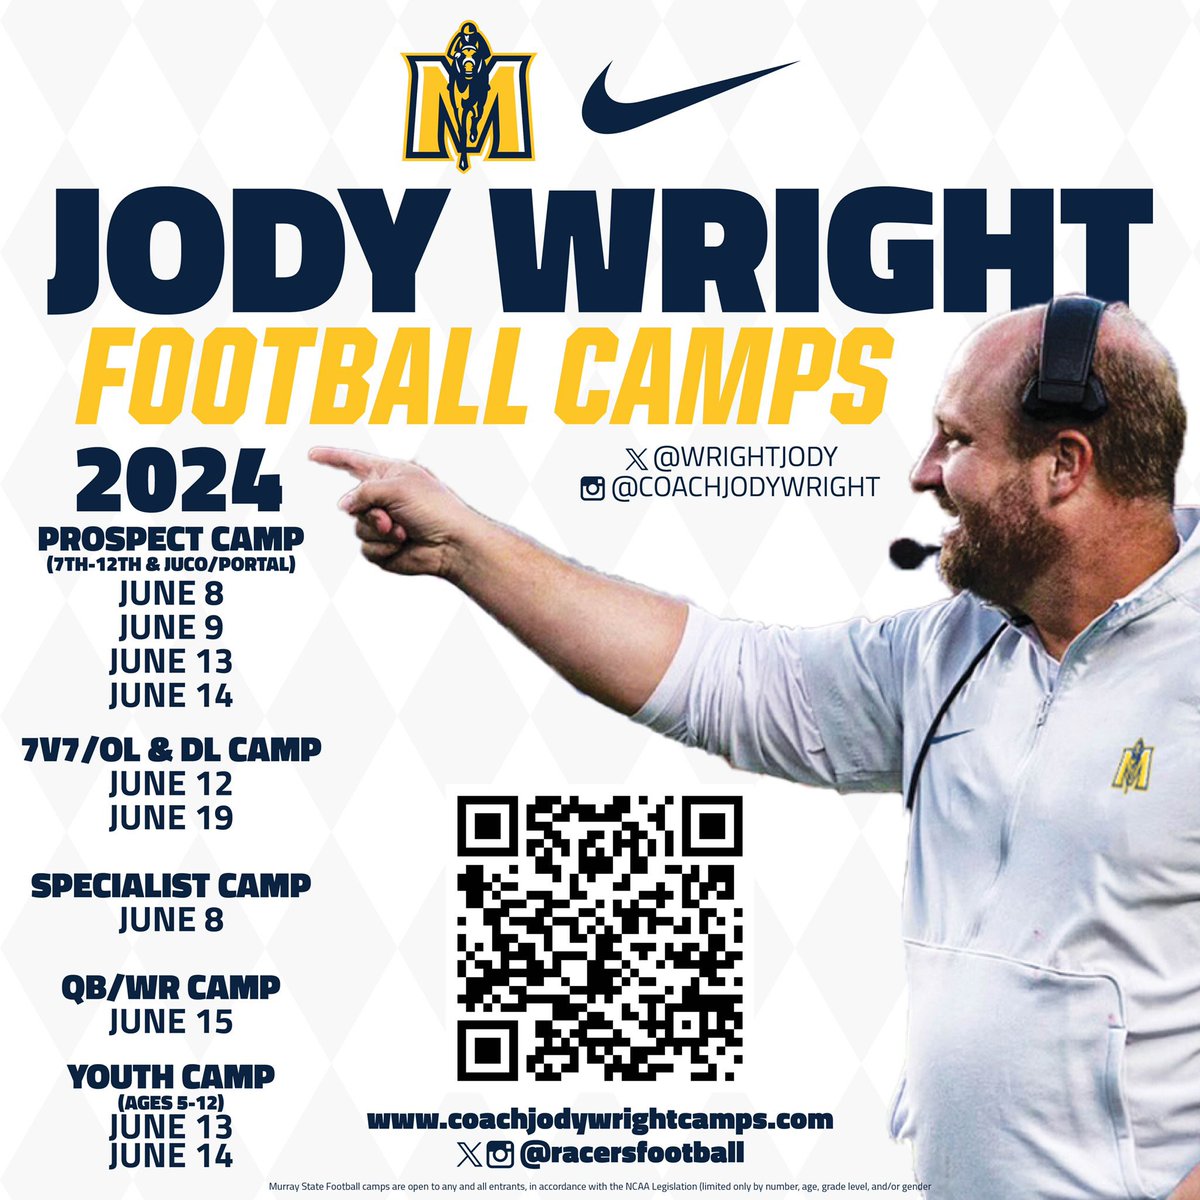 Excited to meet future Racers at camp this summer! #FindAWay #GoRacers @WrightJody @racersfootball coachjodywrightcamps.com